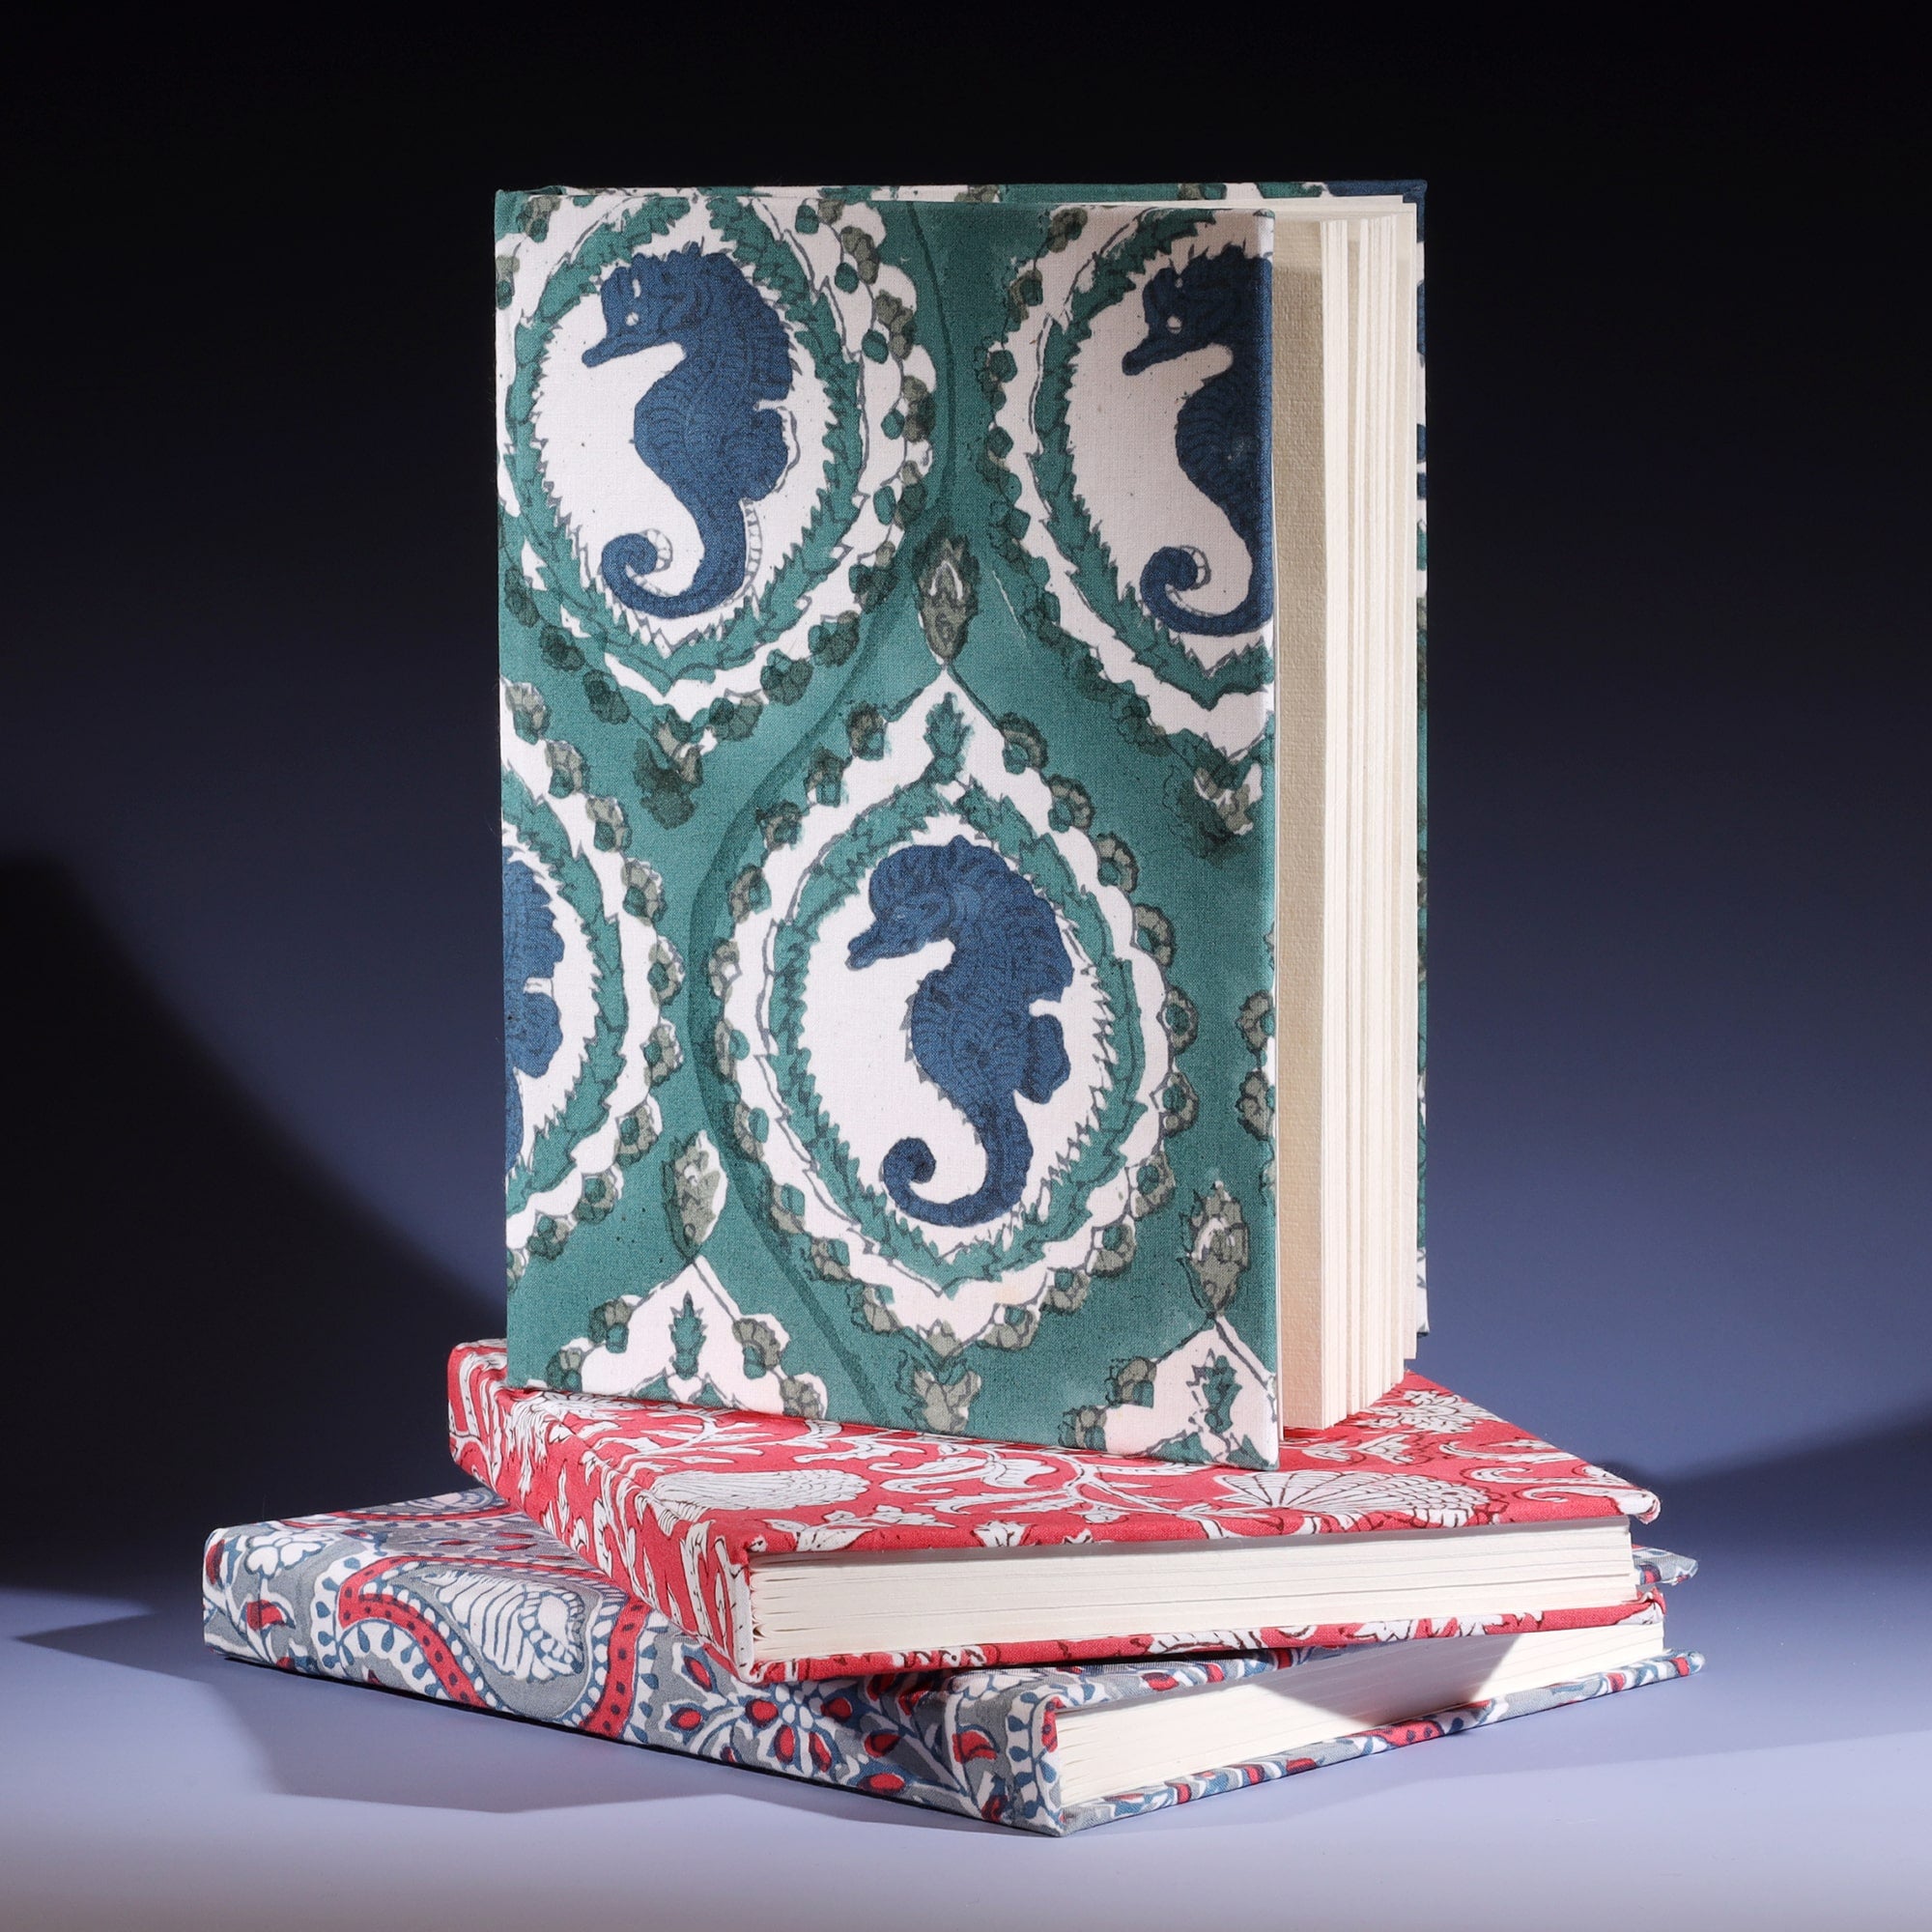 Hand Block printed hard backed notebook Seahorse Cameo in Ocean on its side placed on a stack of other notebooks